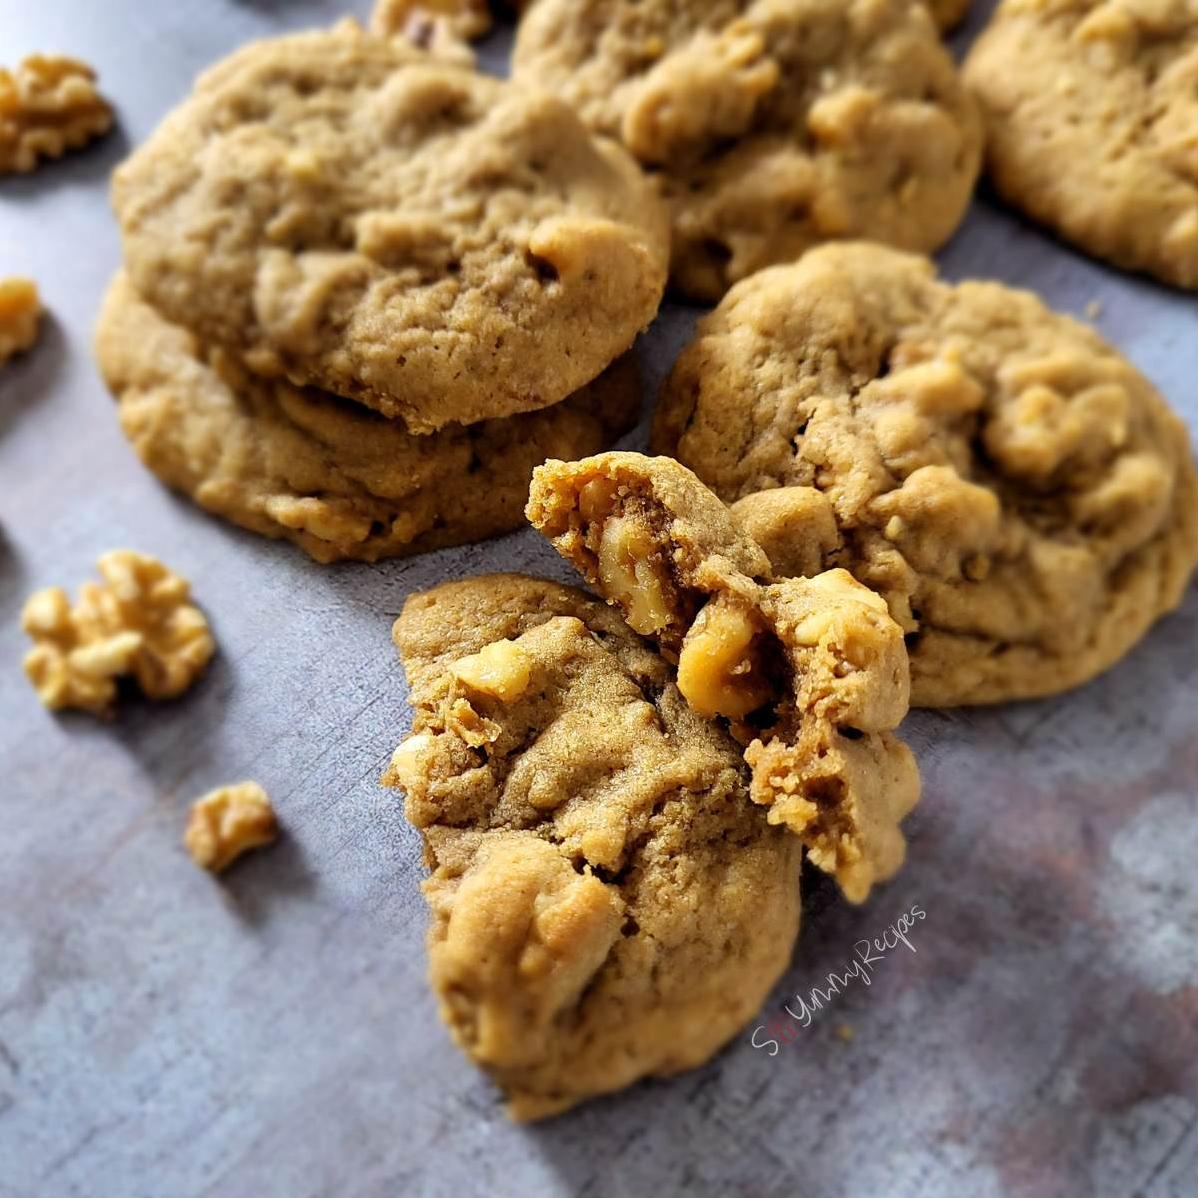  A batch of delicious walnut coffee cookies for your cravings!